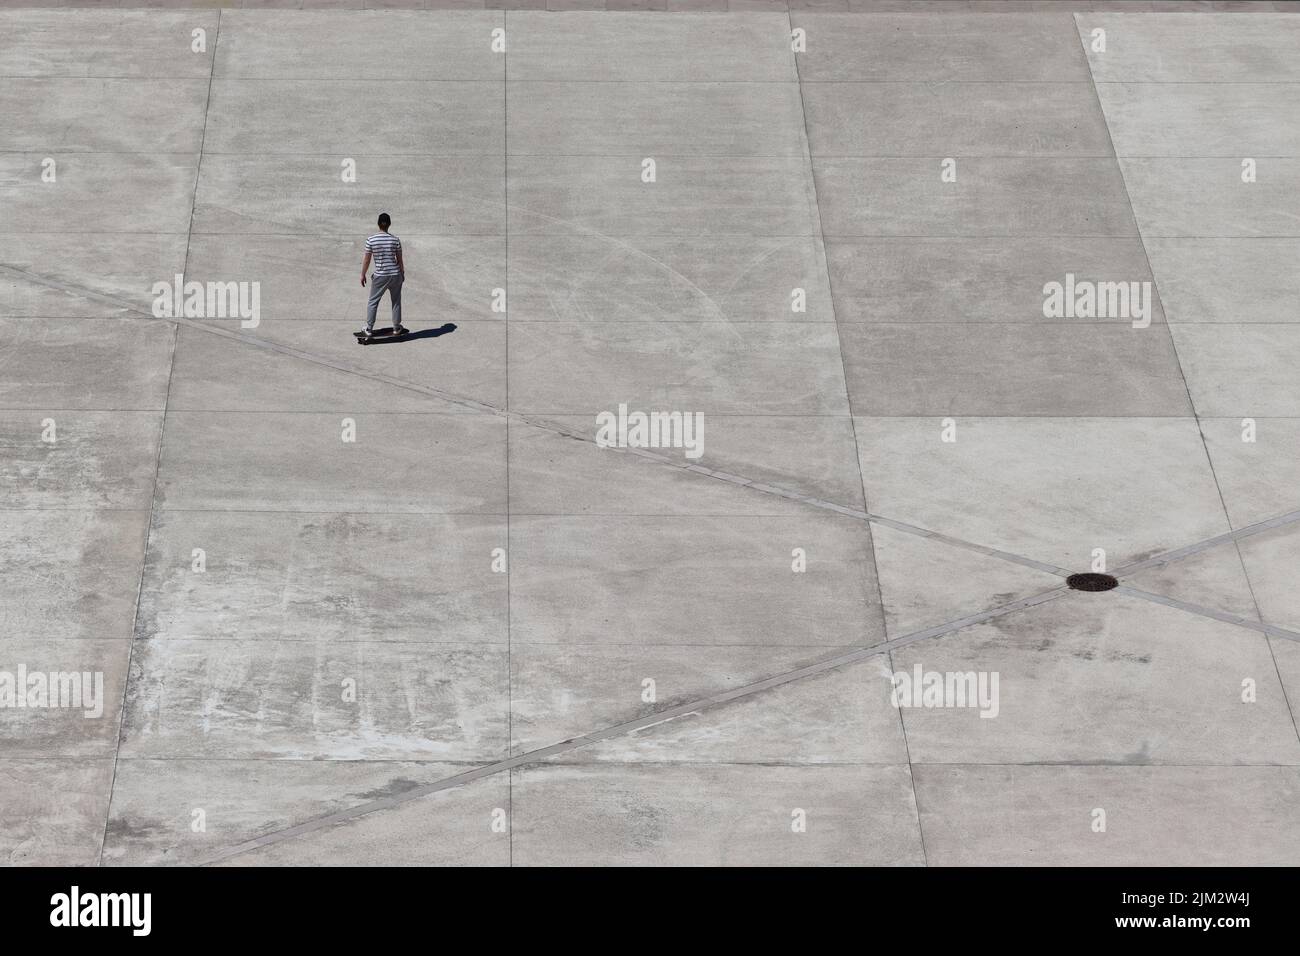 A lone male skateboarder prepares to enjoy the freedom this vast expanse affords on Lisbon seafront. Stock Photo